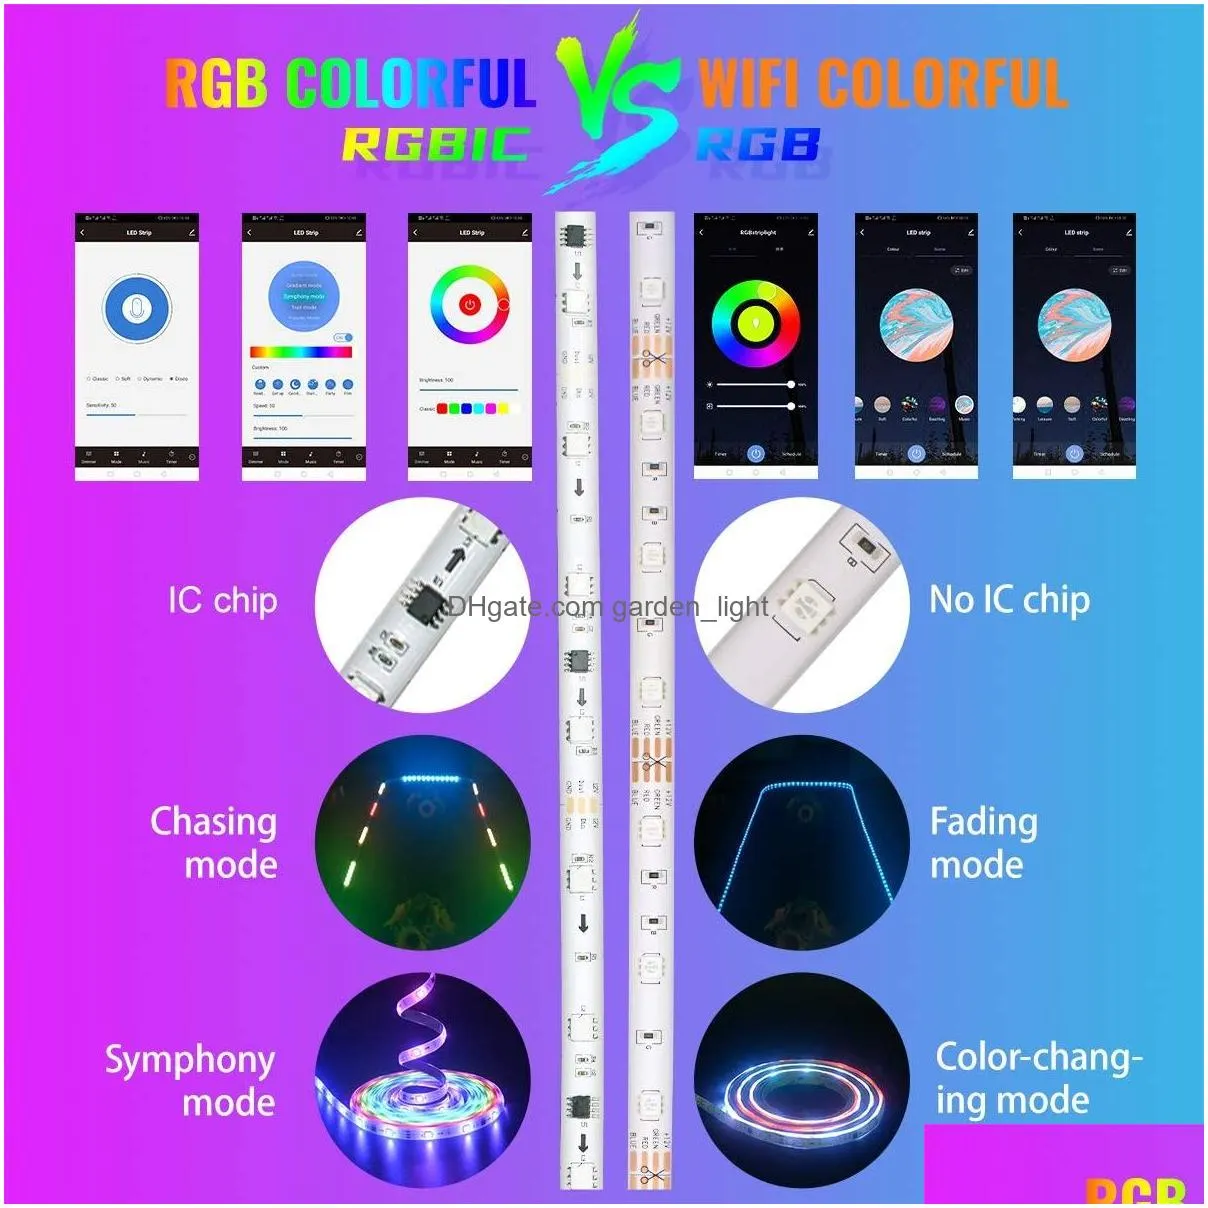 2022 smart rgbic led strip lights 16.4ft 32.8ft bluetooth app control remote music sync color changing for bedroom kitchen home decoration